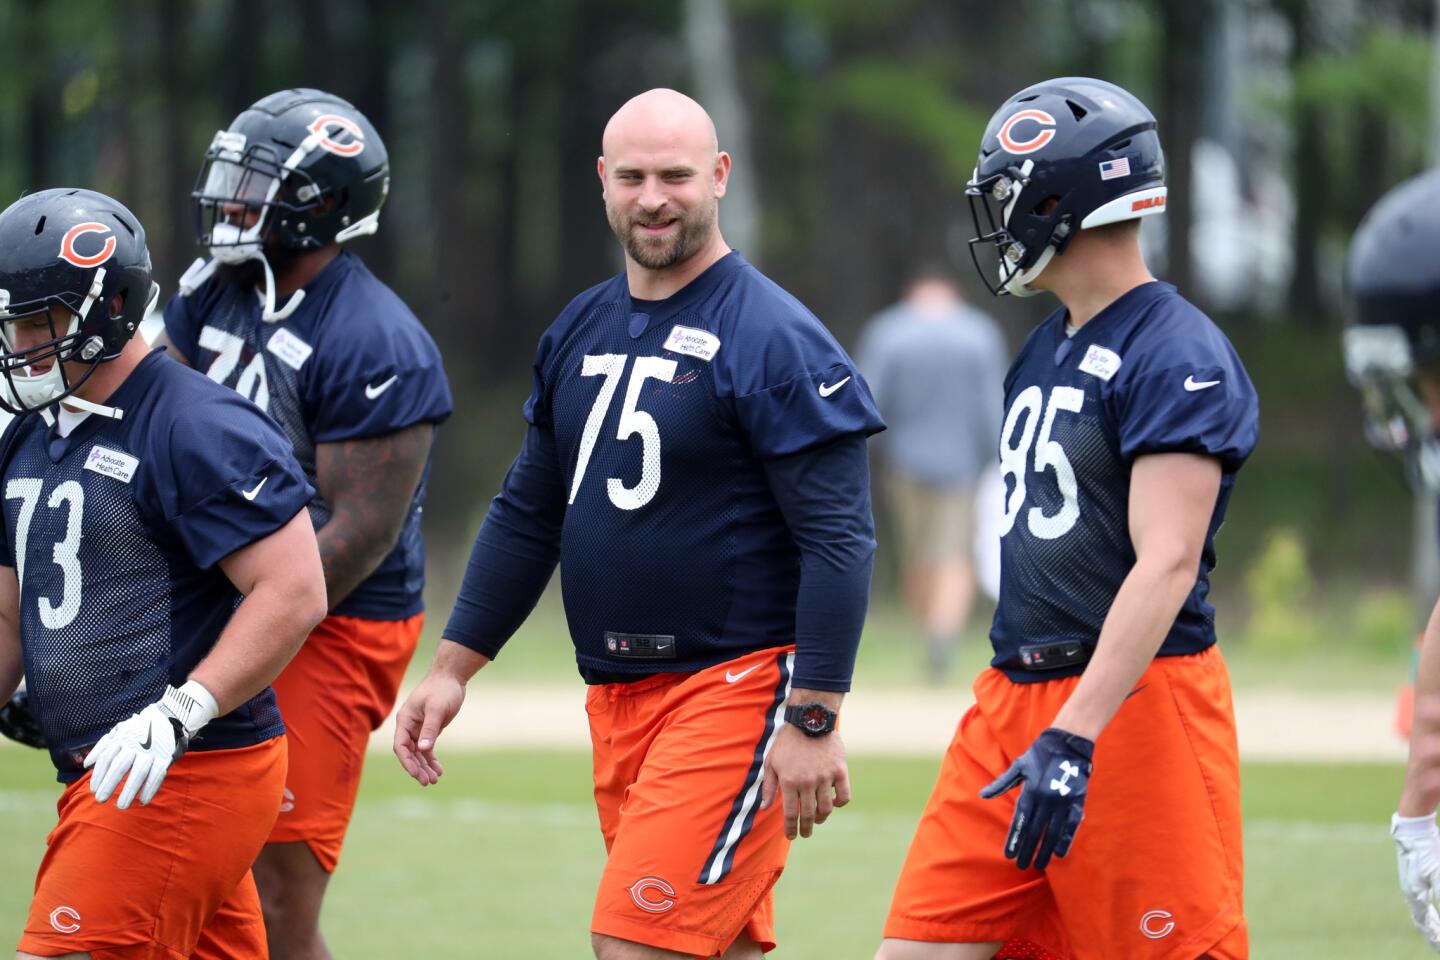 Bears offensive guard Kyle Long (75) during minicamp Wednesday, June 6, 2018 at Halas Hall.